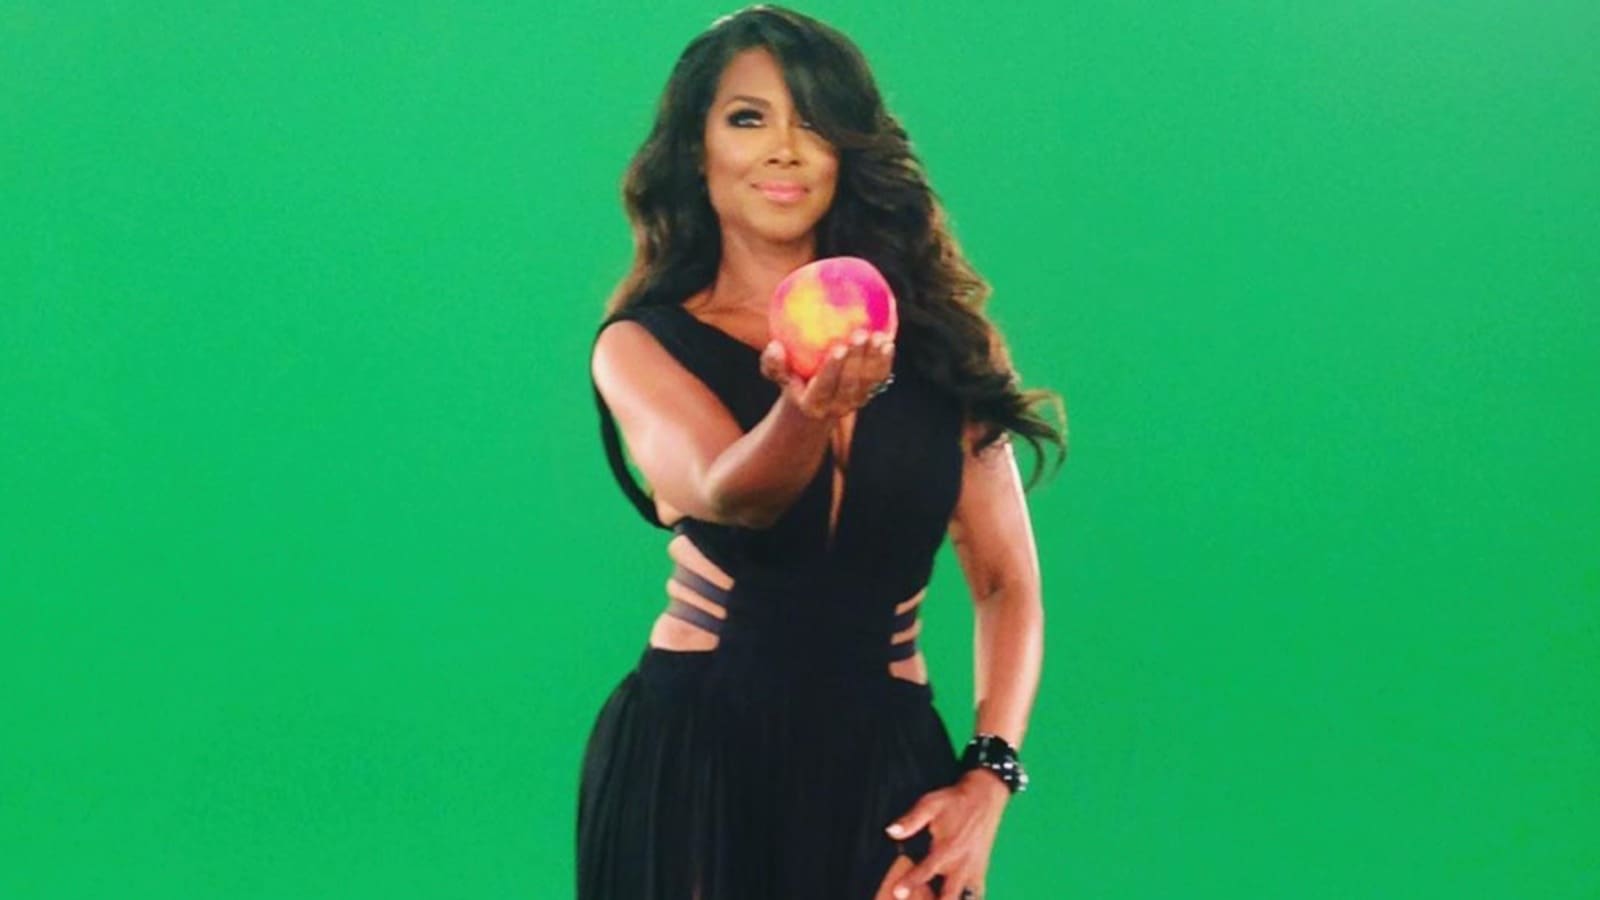 Kenya Moore's Fans Are Calling Her The 'Black Barbie'